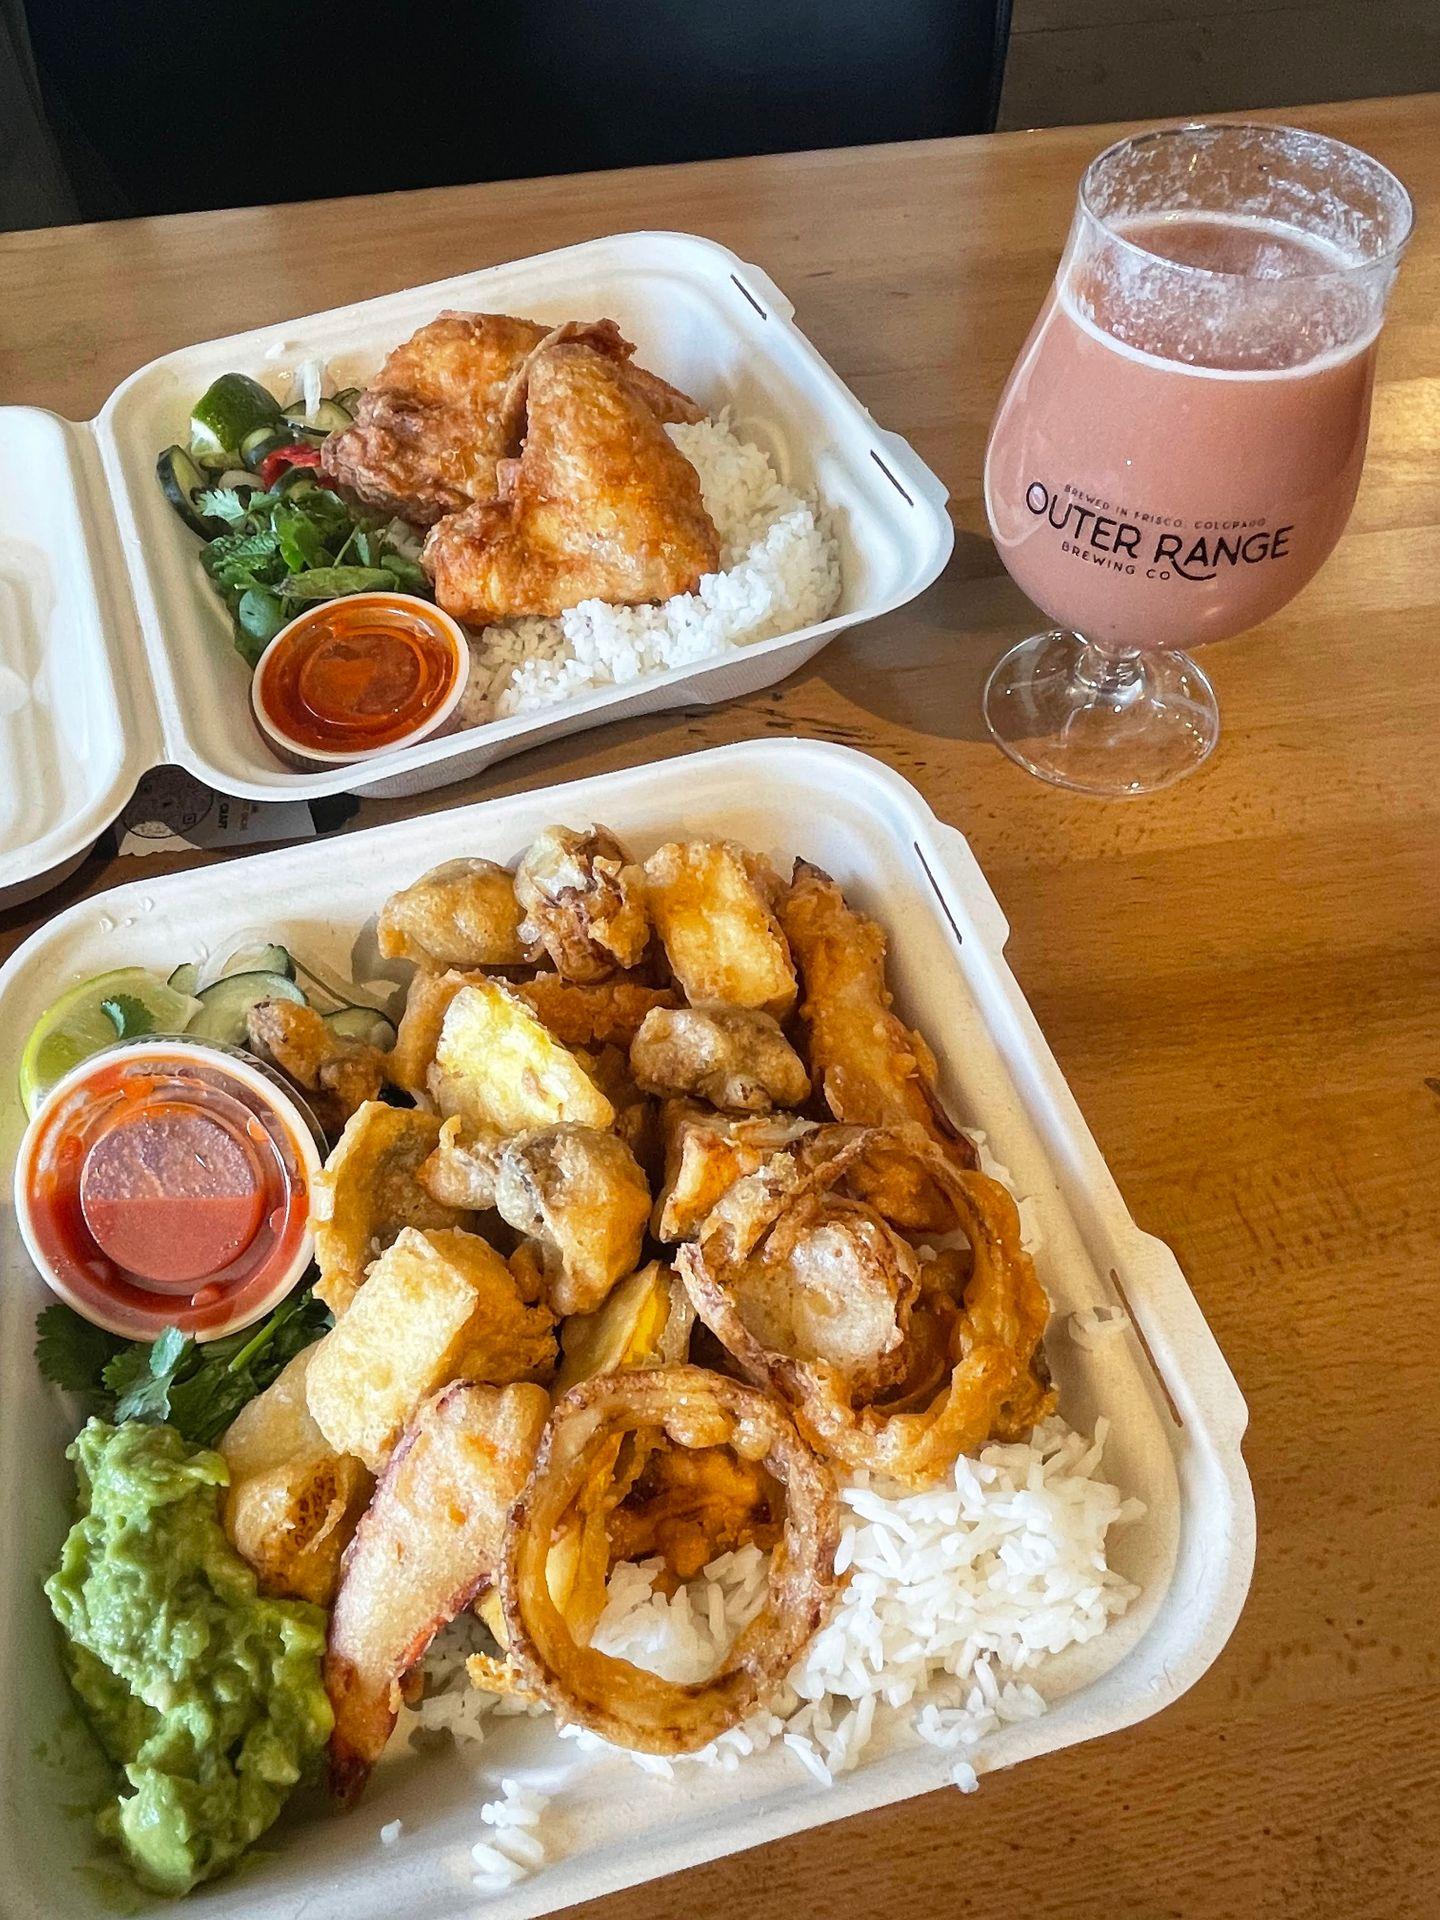 A table with two meals from Bird Craft and a smoothie sour beer. The closest meal is the tofu and veggie bowl, which includes white rice, fried vegtables, tofu, guacamole and a red sauce in a cup.